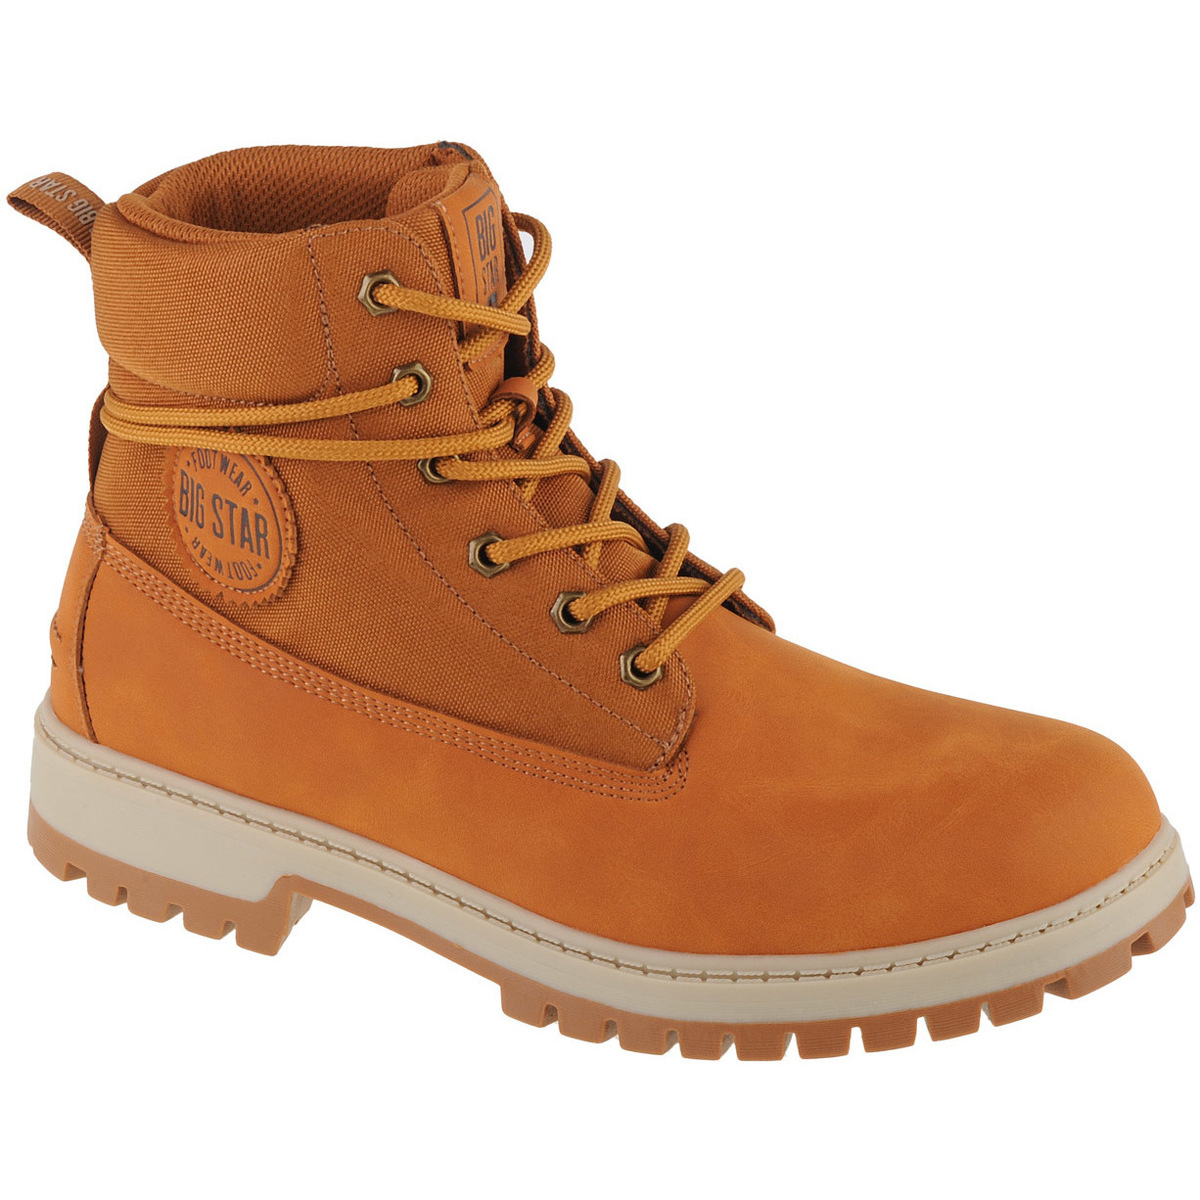 Sapatos Homem the sneaker iteration features touches of Pacific Blue Hiking Boots Castanho